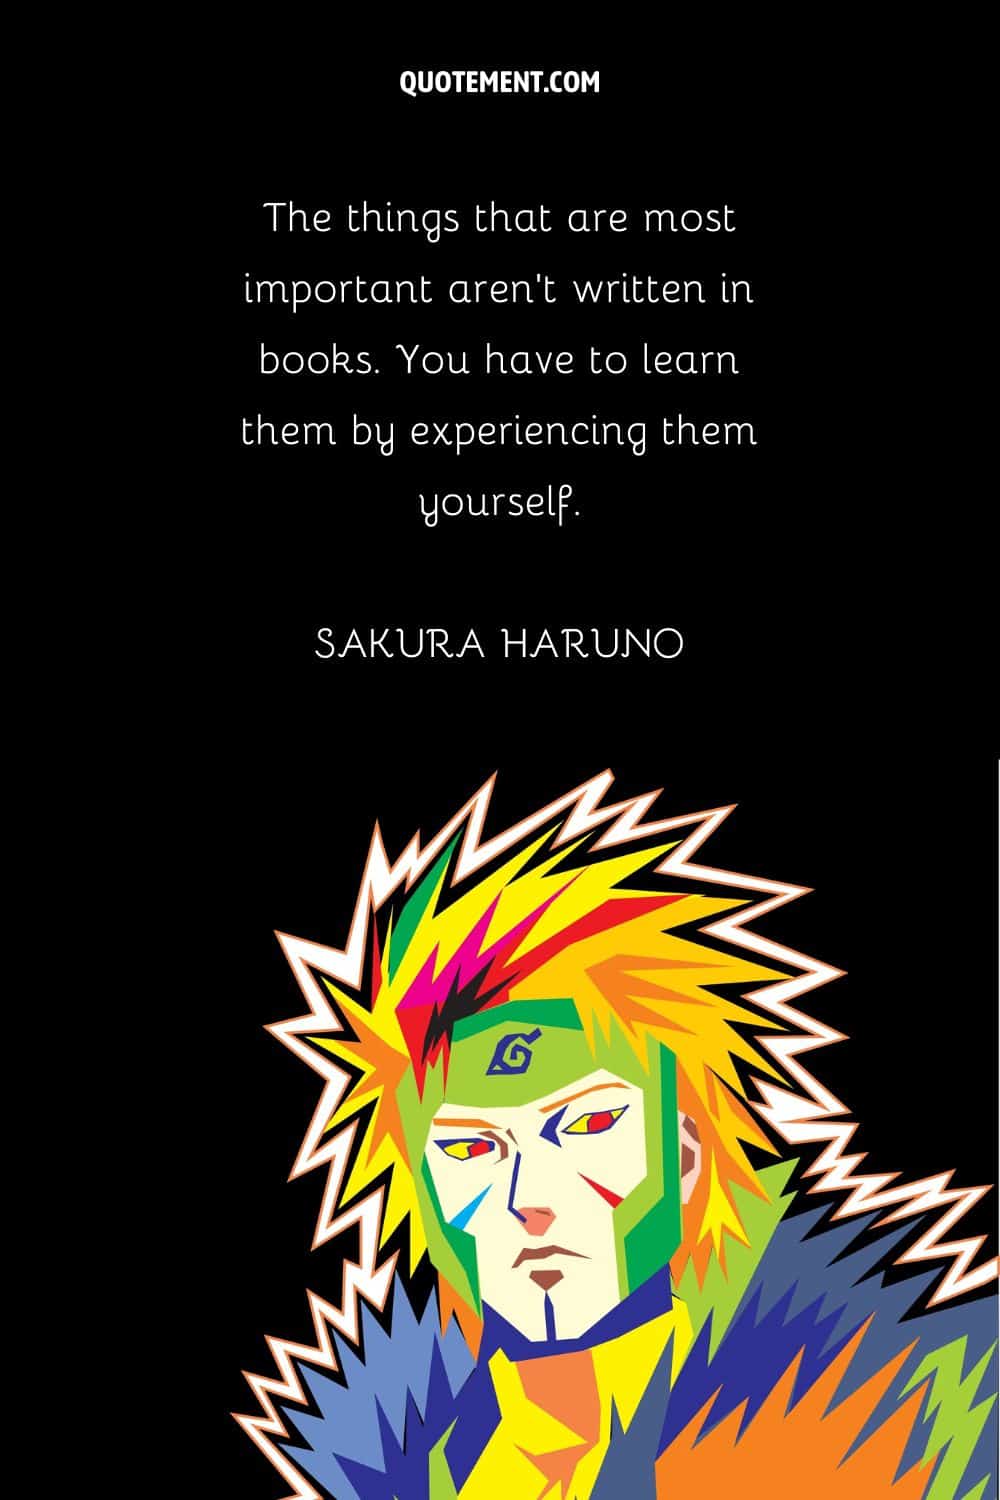 “The things that are most important aren’t written in books. You have to learn them by experiencing them yourself.” — Sakura Haruno